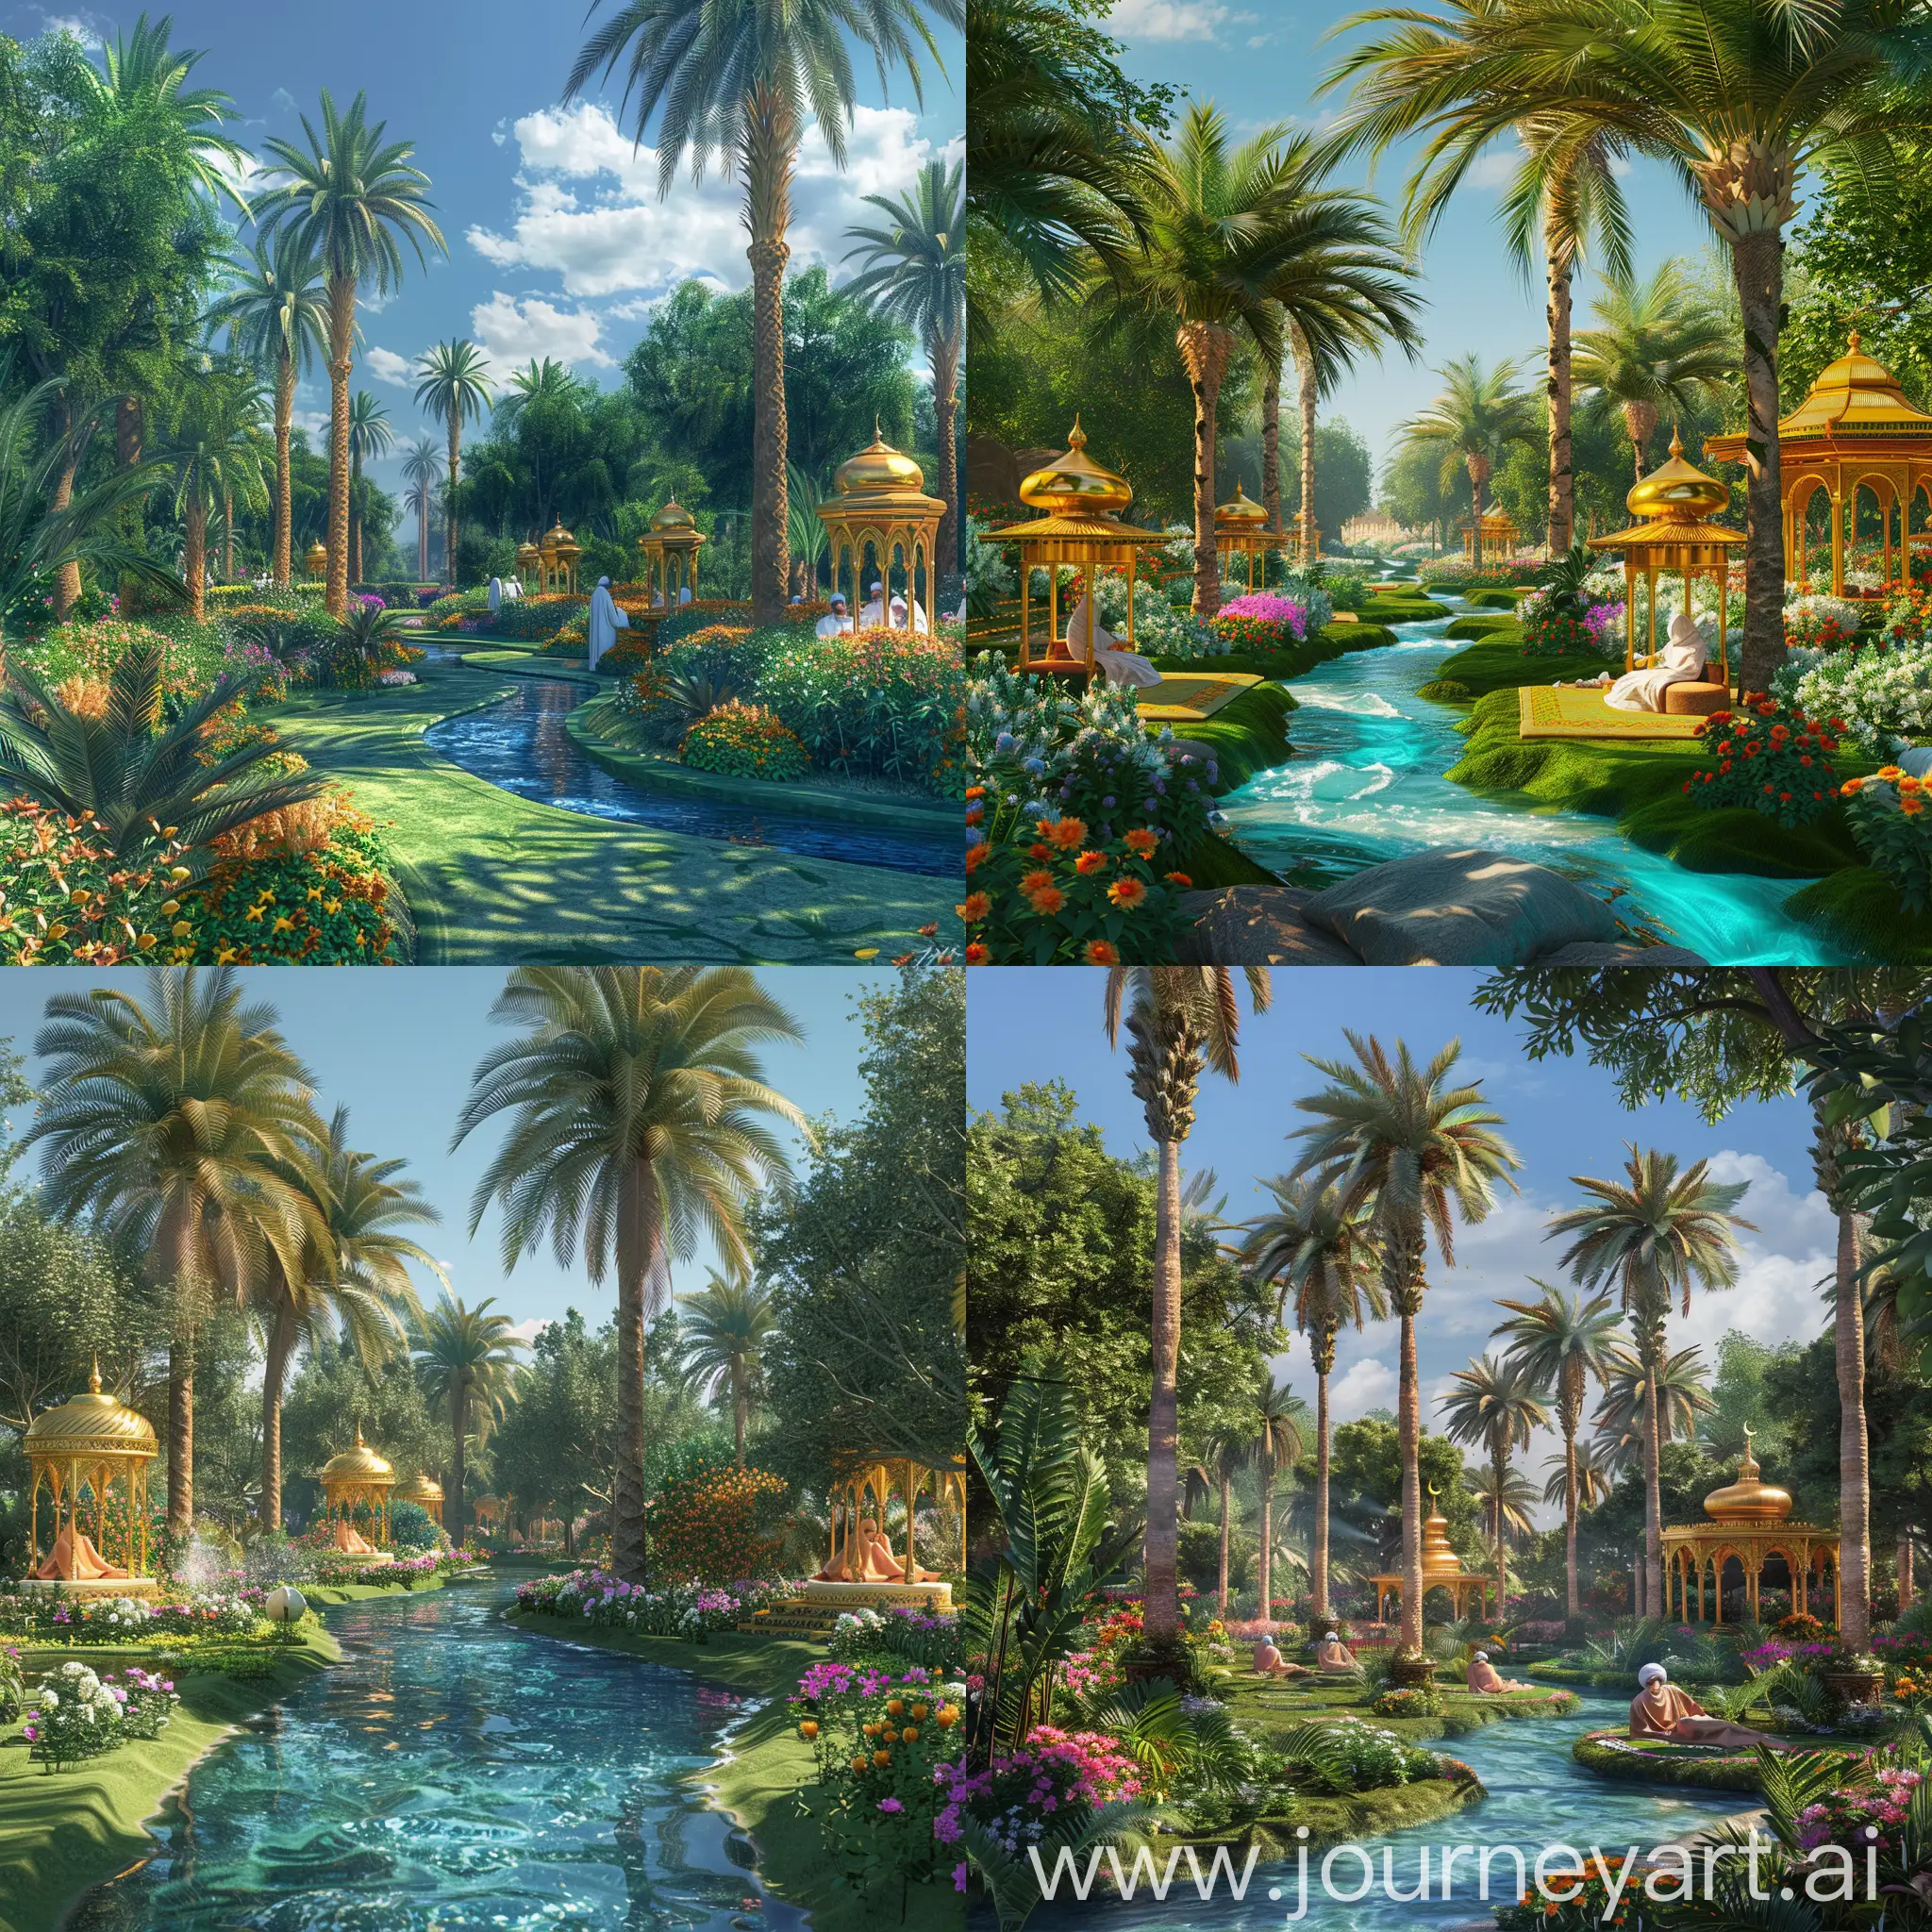 Within the verdant paradise of Jannah, gentle souls dwell peacefully under a serene blue sky. Tall date palms provide shade amidst flowers of every warm hue, their rustling forming a soothing backdrop. Crystalline streams flow through lush gardens and
meandering waterways, their gentle currents flowing cool and clear for all to drink. Upon carpets of softest green, the faithful relax in robes of finest fabric, conversing blithely amid the greenery. Golden pavilions of exquisite
architecture are nestled between groves, their
interiors aglow with a warm luminous light.
Across verdant meadows and beneath the
trees, inhabitants live fully content and
carefree, desiring nothing. No illness, hardship or suffering exists within this blissful domain.Render this idyllic realm in realistic digital detail, depicting a tranquil oasis as scripture describes the highest paradise attainable.
